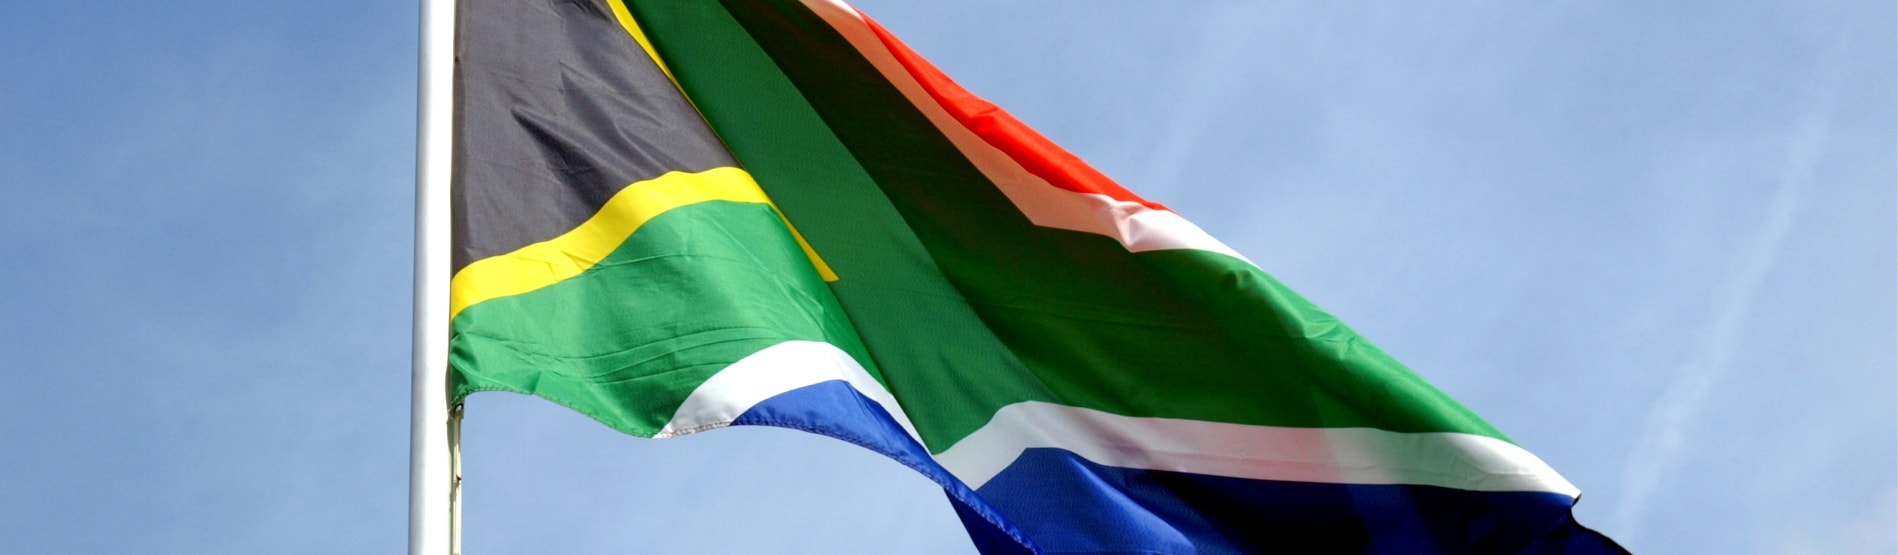 South Africa flag blowing in the breeze.